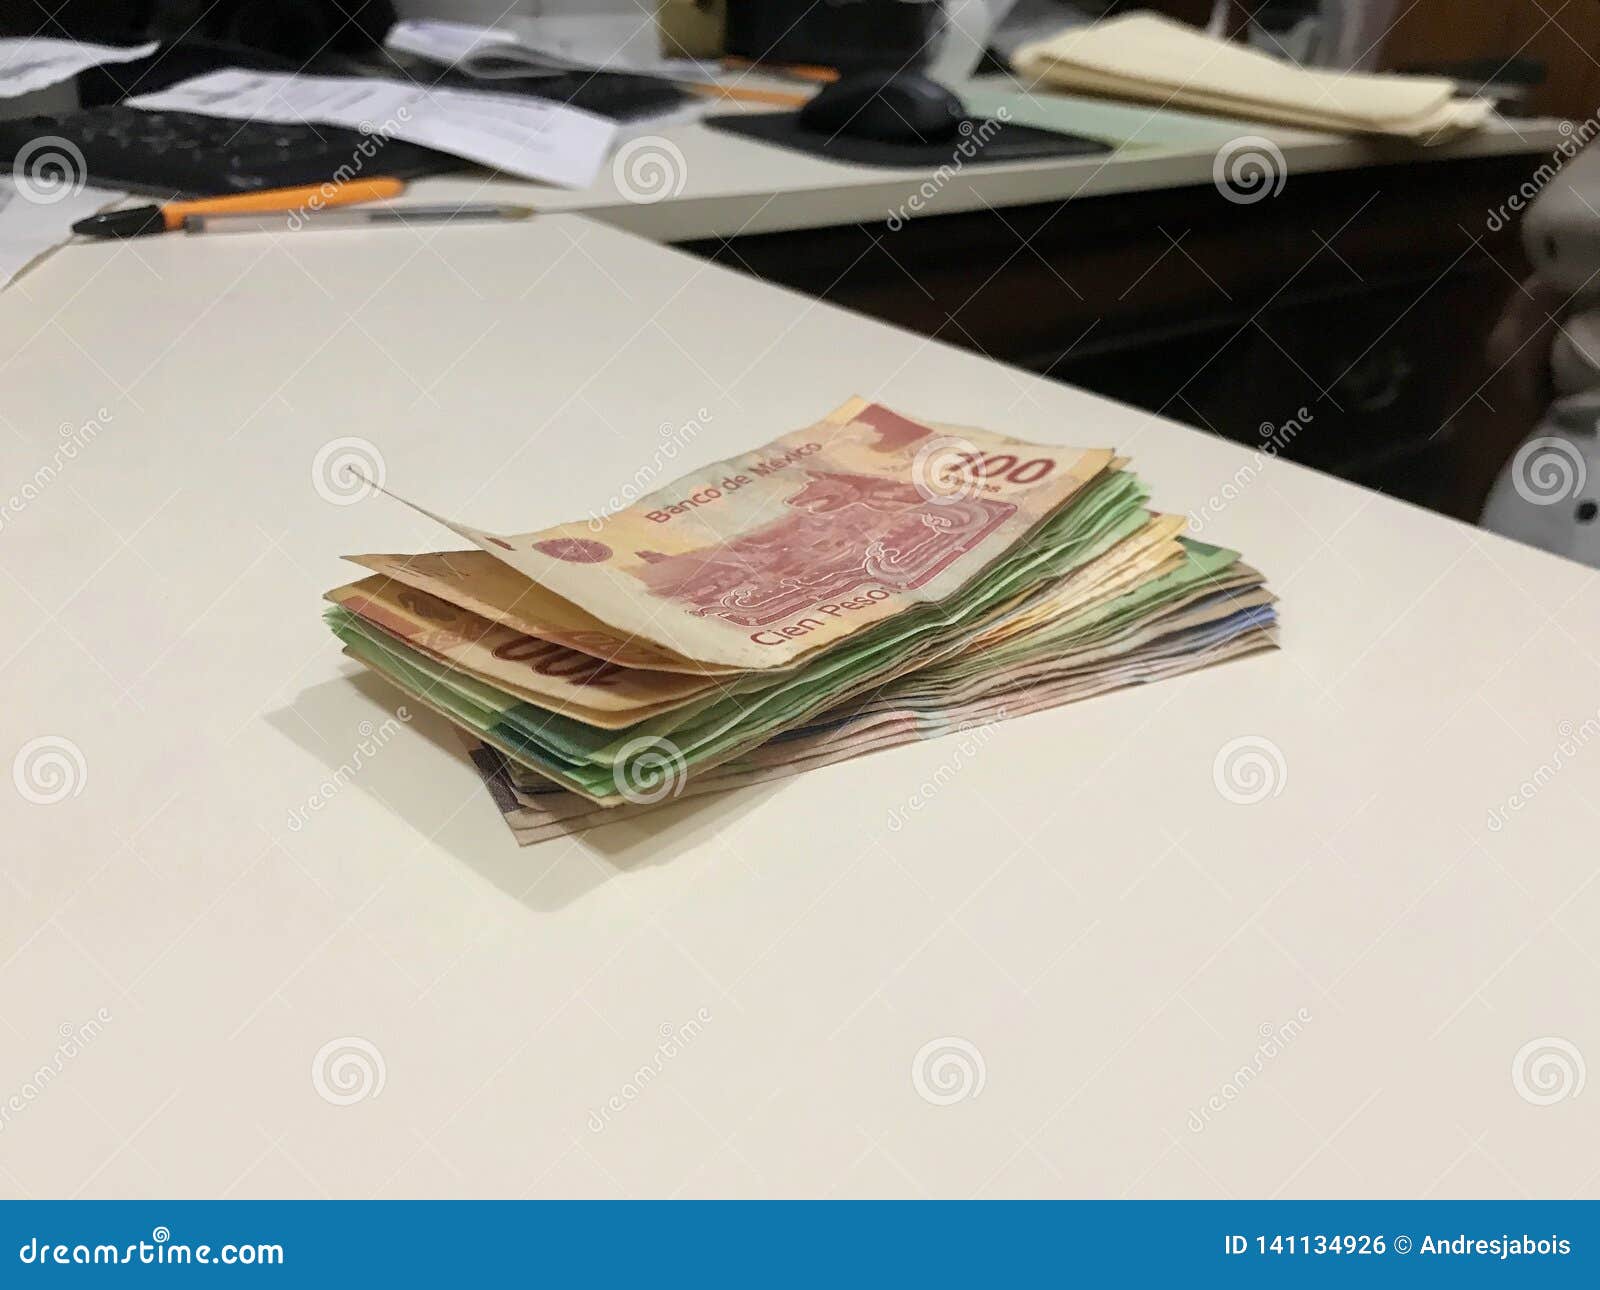 many mixed mexican peso bills spread over a beige desk